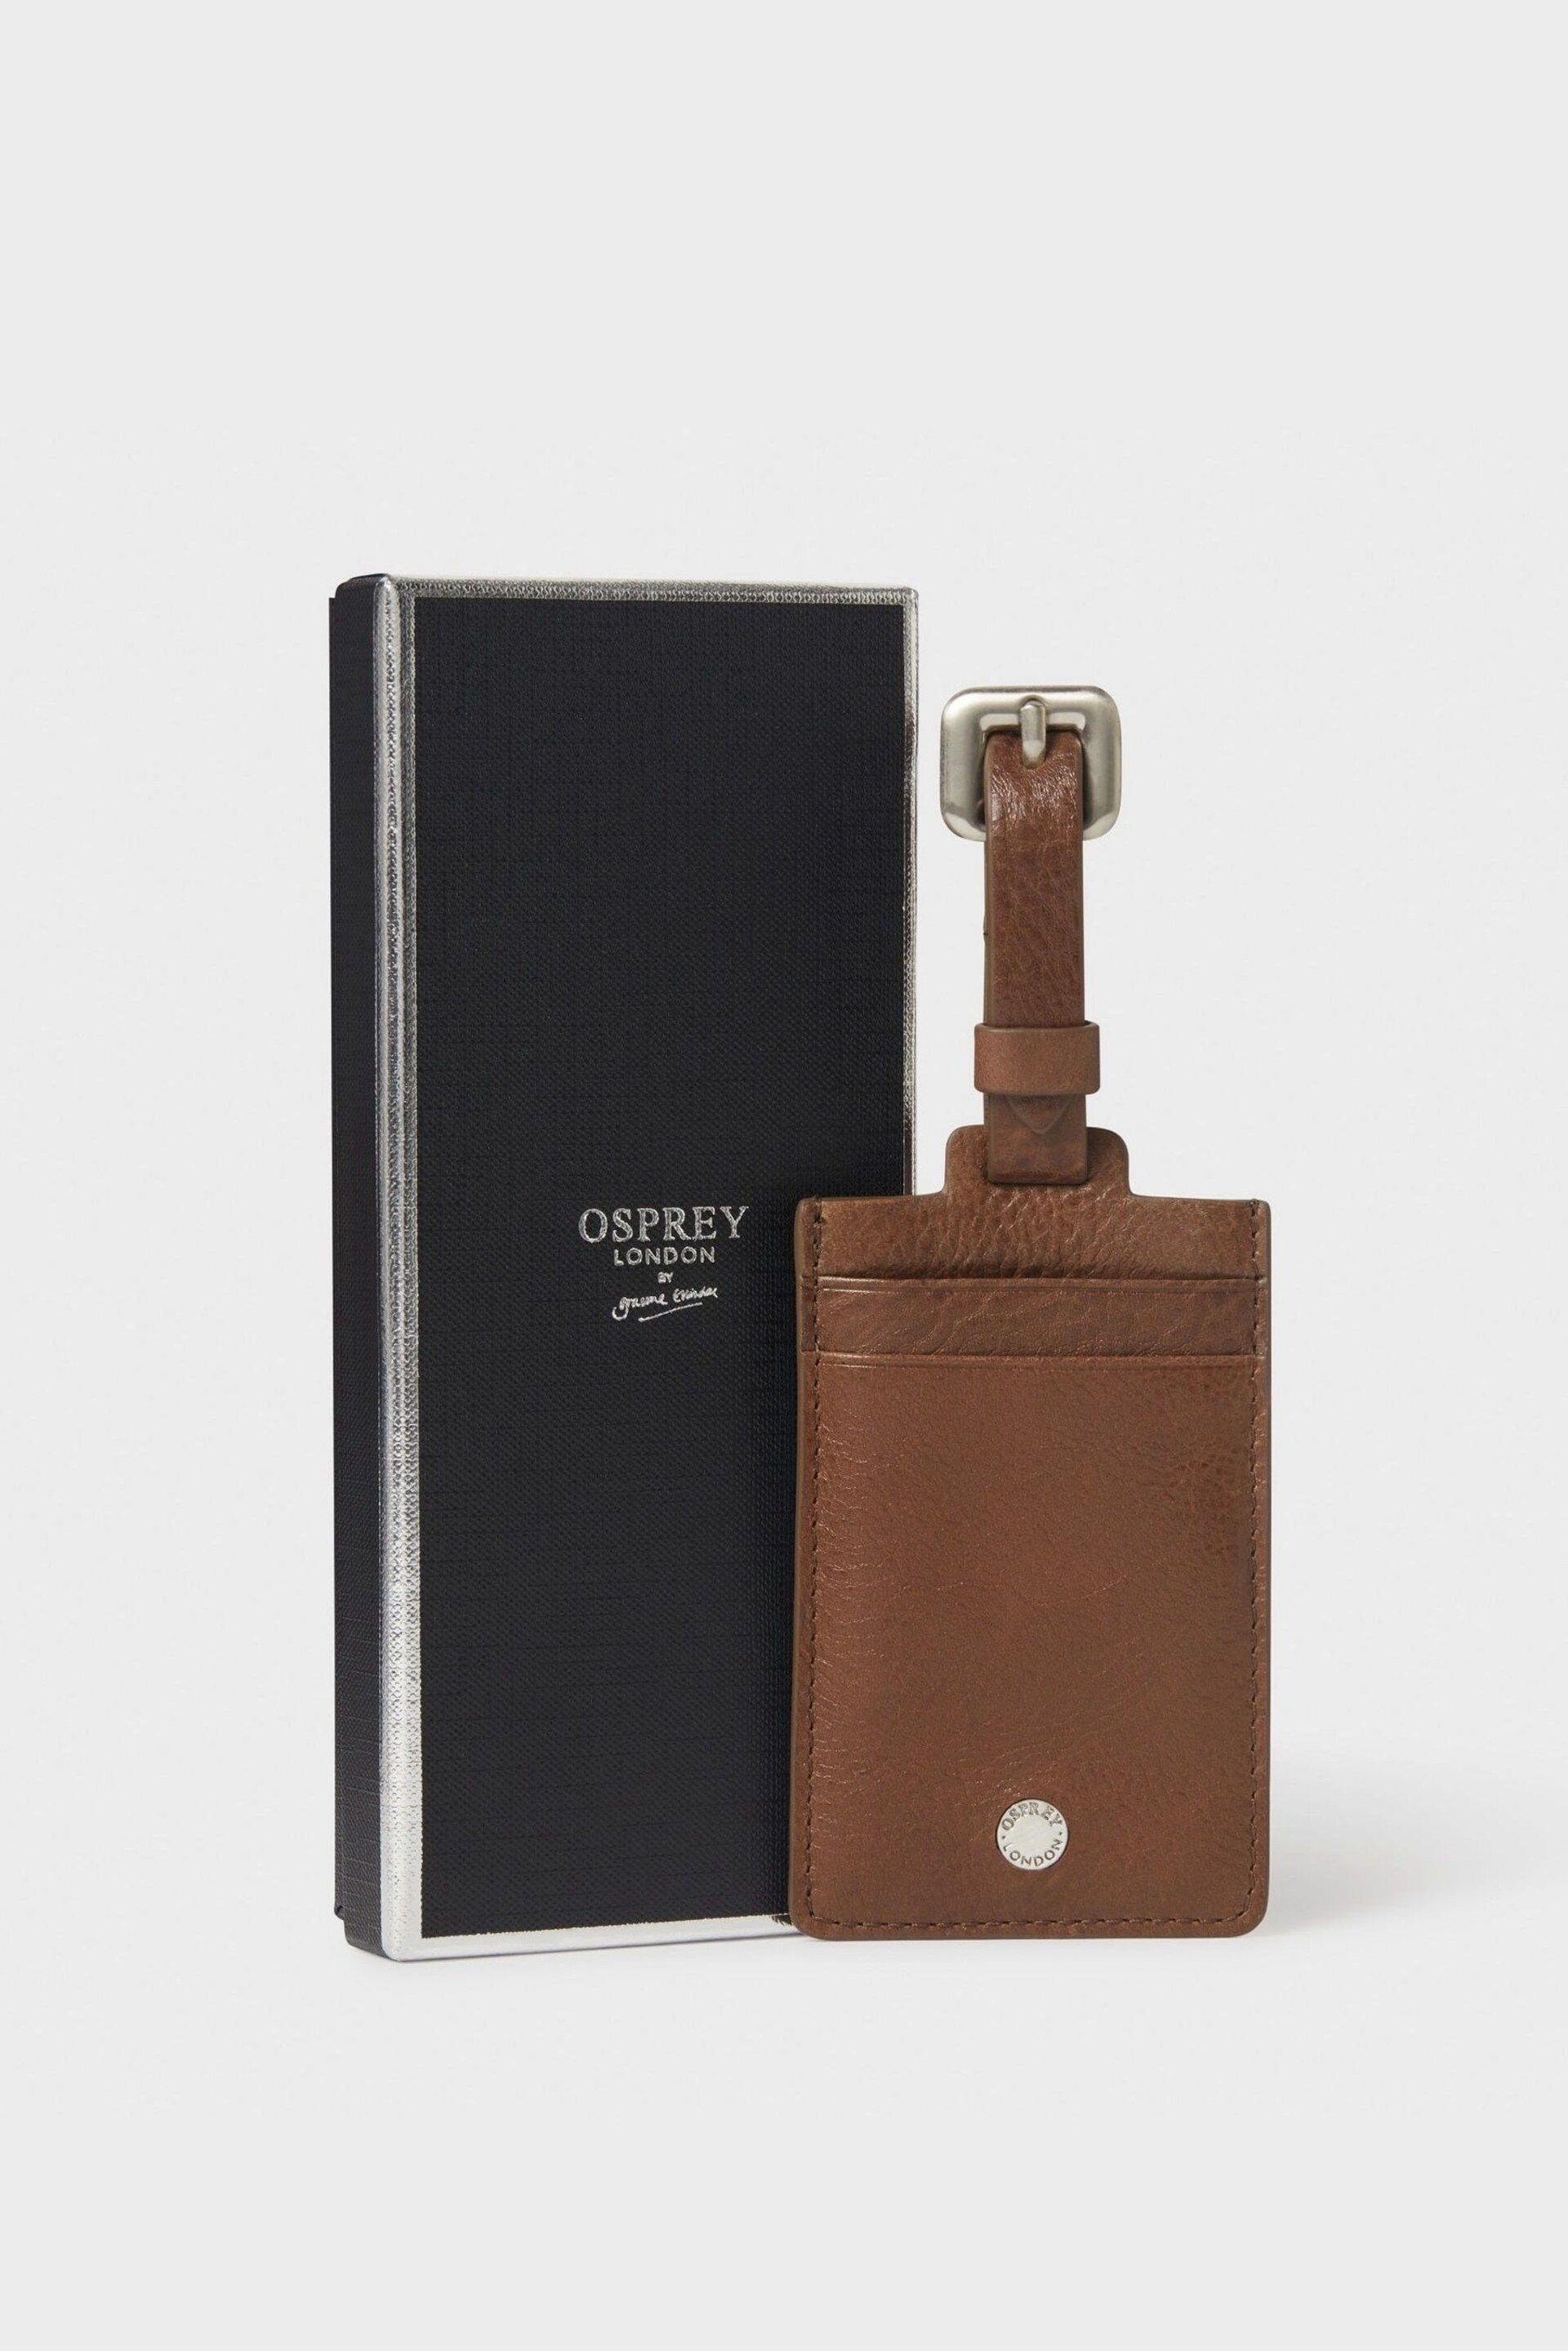 OSPREY LONDON Business Class Leather Luggage Tag - Image 1 of 5